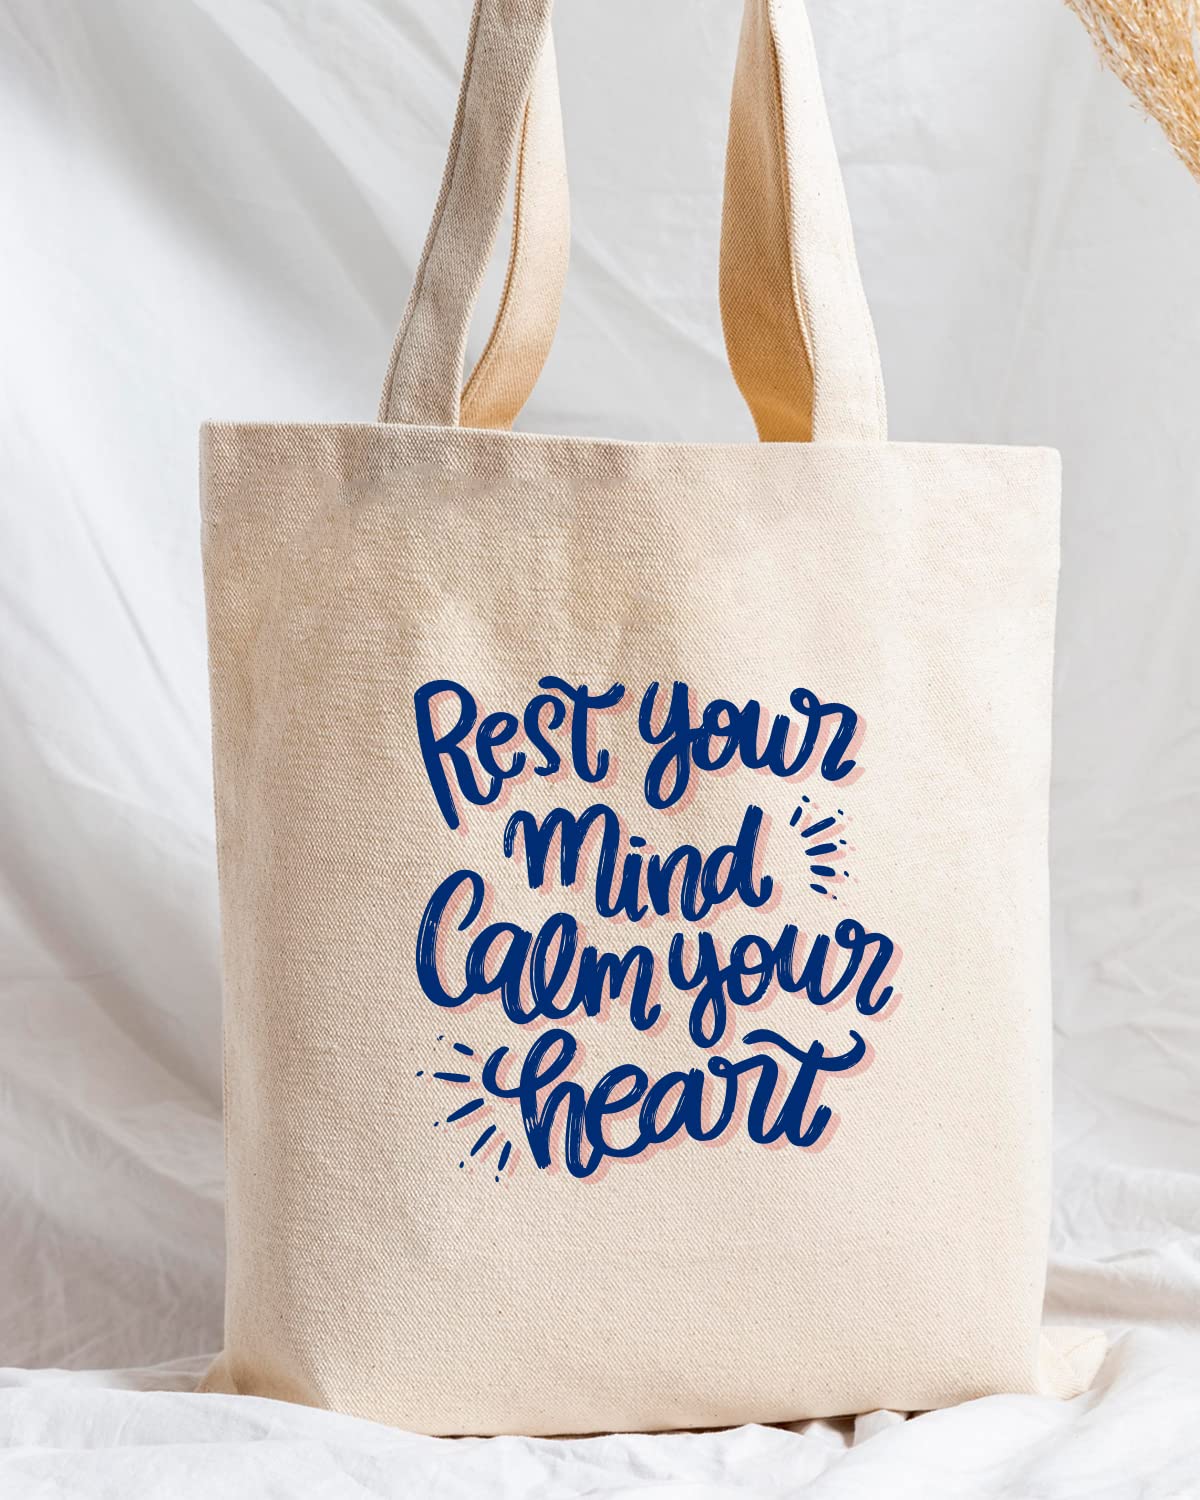 The Pink Magnet Rest Your Mind Calm Your Heart Tote Bag - Canvas Tote Bag for Women | Printed Multipurpose Cotton Bags | Cute Hand Bag for Girls | Best for College, Travel, Grocery | Reusable Shopping Bag